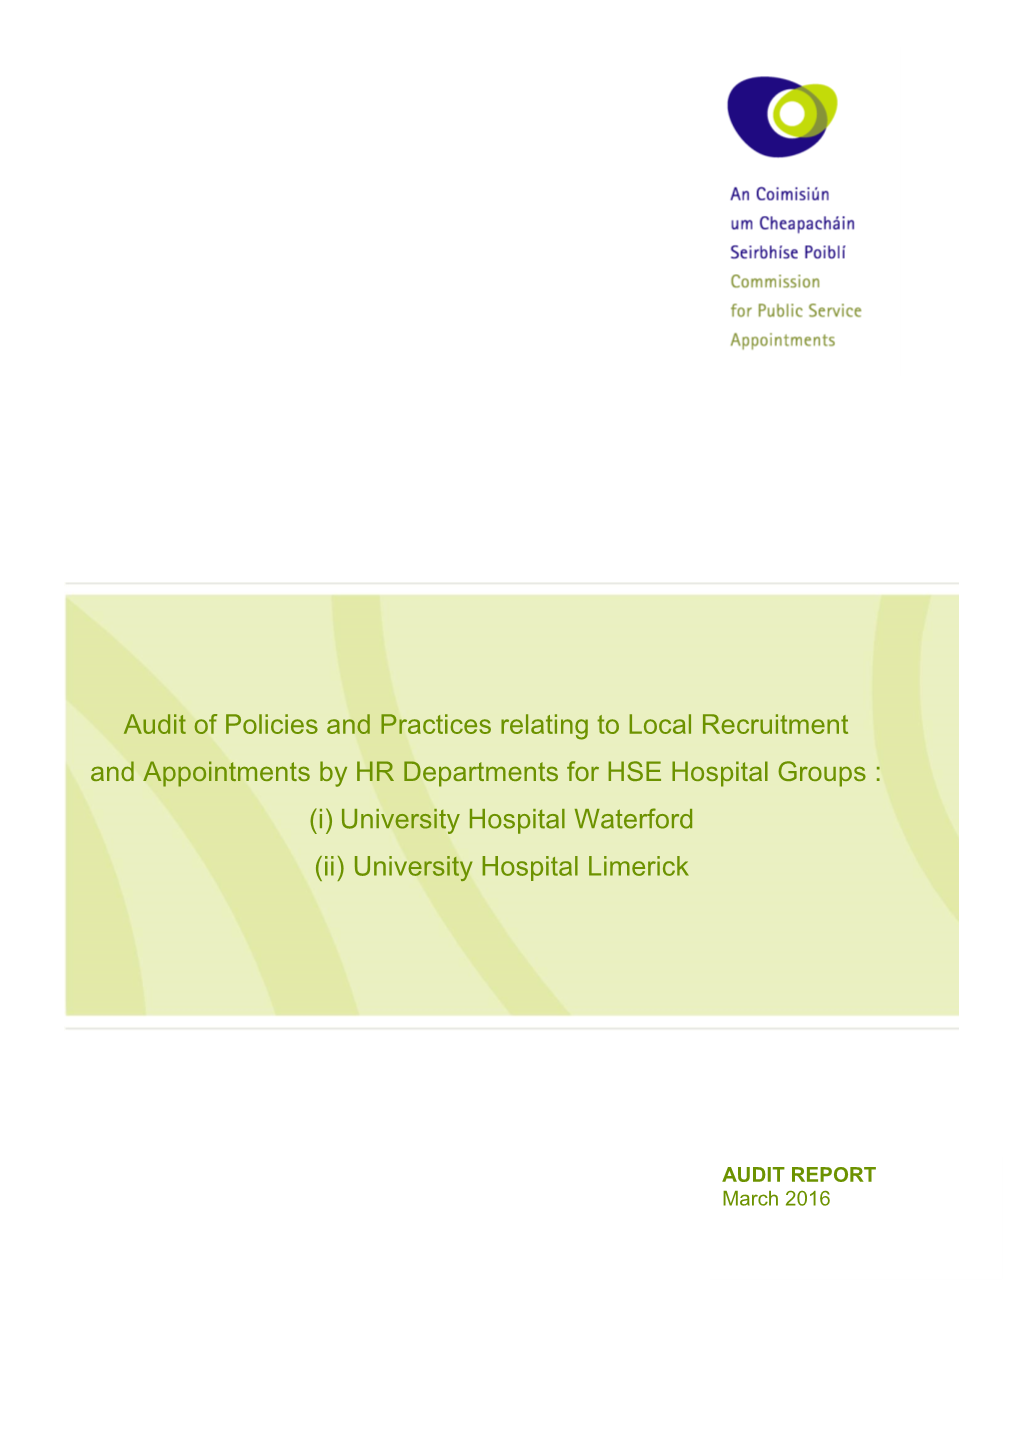 Audit of Policies and Practices Relating to Local Recruitment And